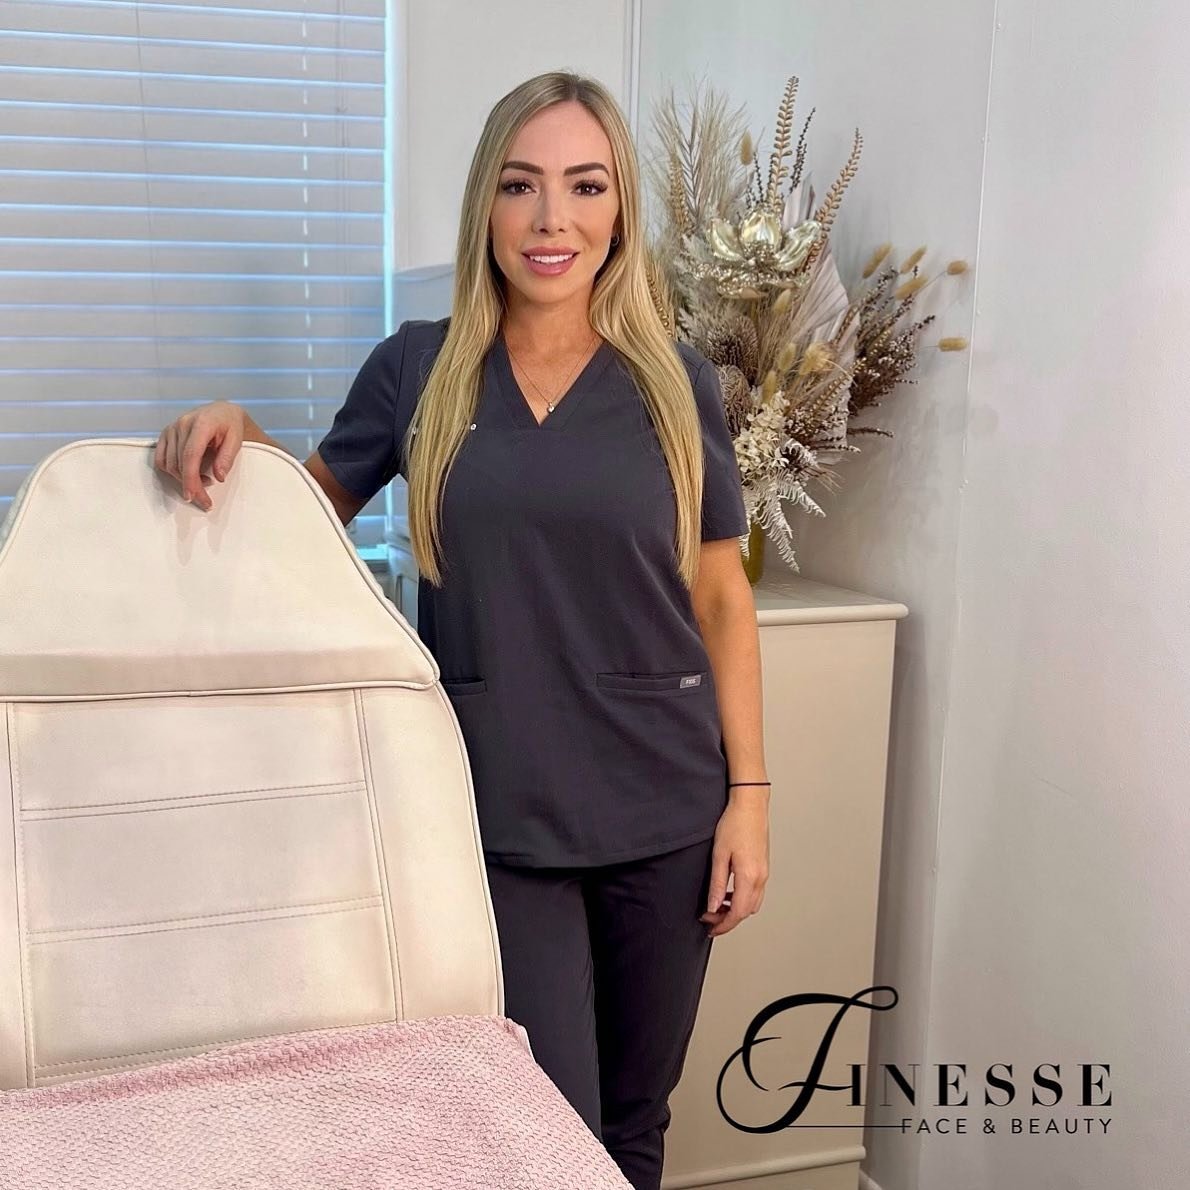 At the forefront of Finesse Face and Beauty, Nurse Karoline performs all procedures with unwavering precision and a steadfast dedication to patient safety. Leveraging her extensive training and years of expertise, Karoline conducts comprehensive full